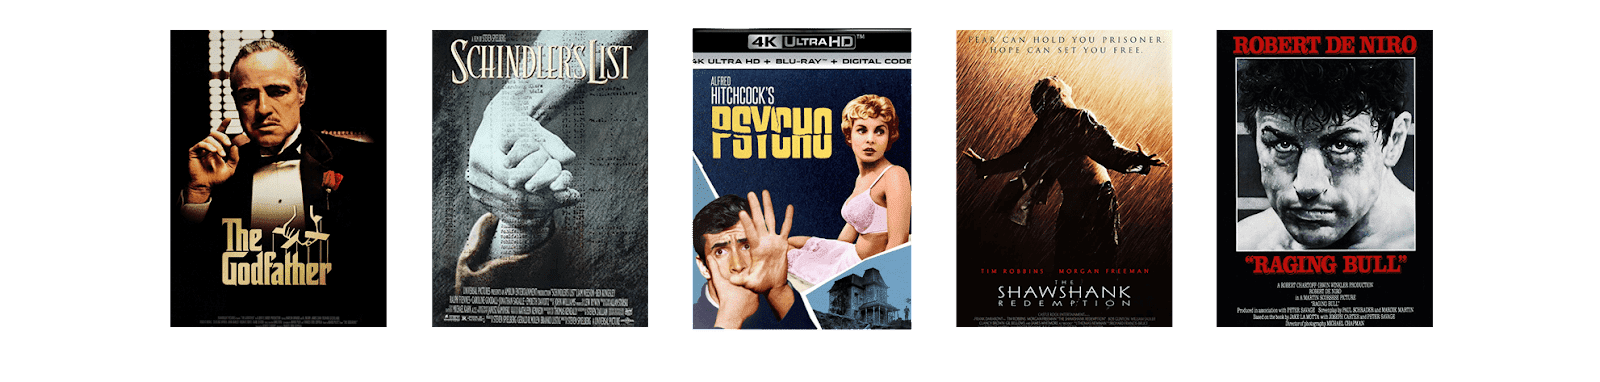 Top 100 movies collections